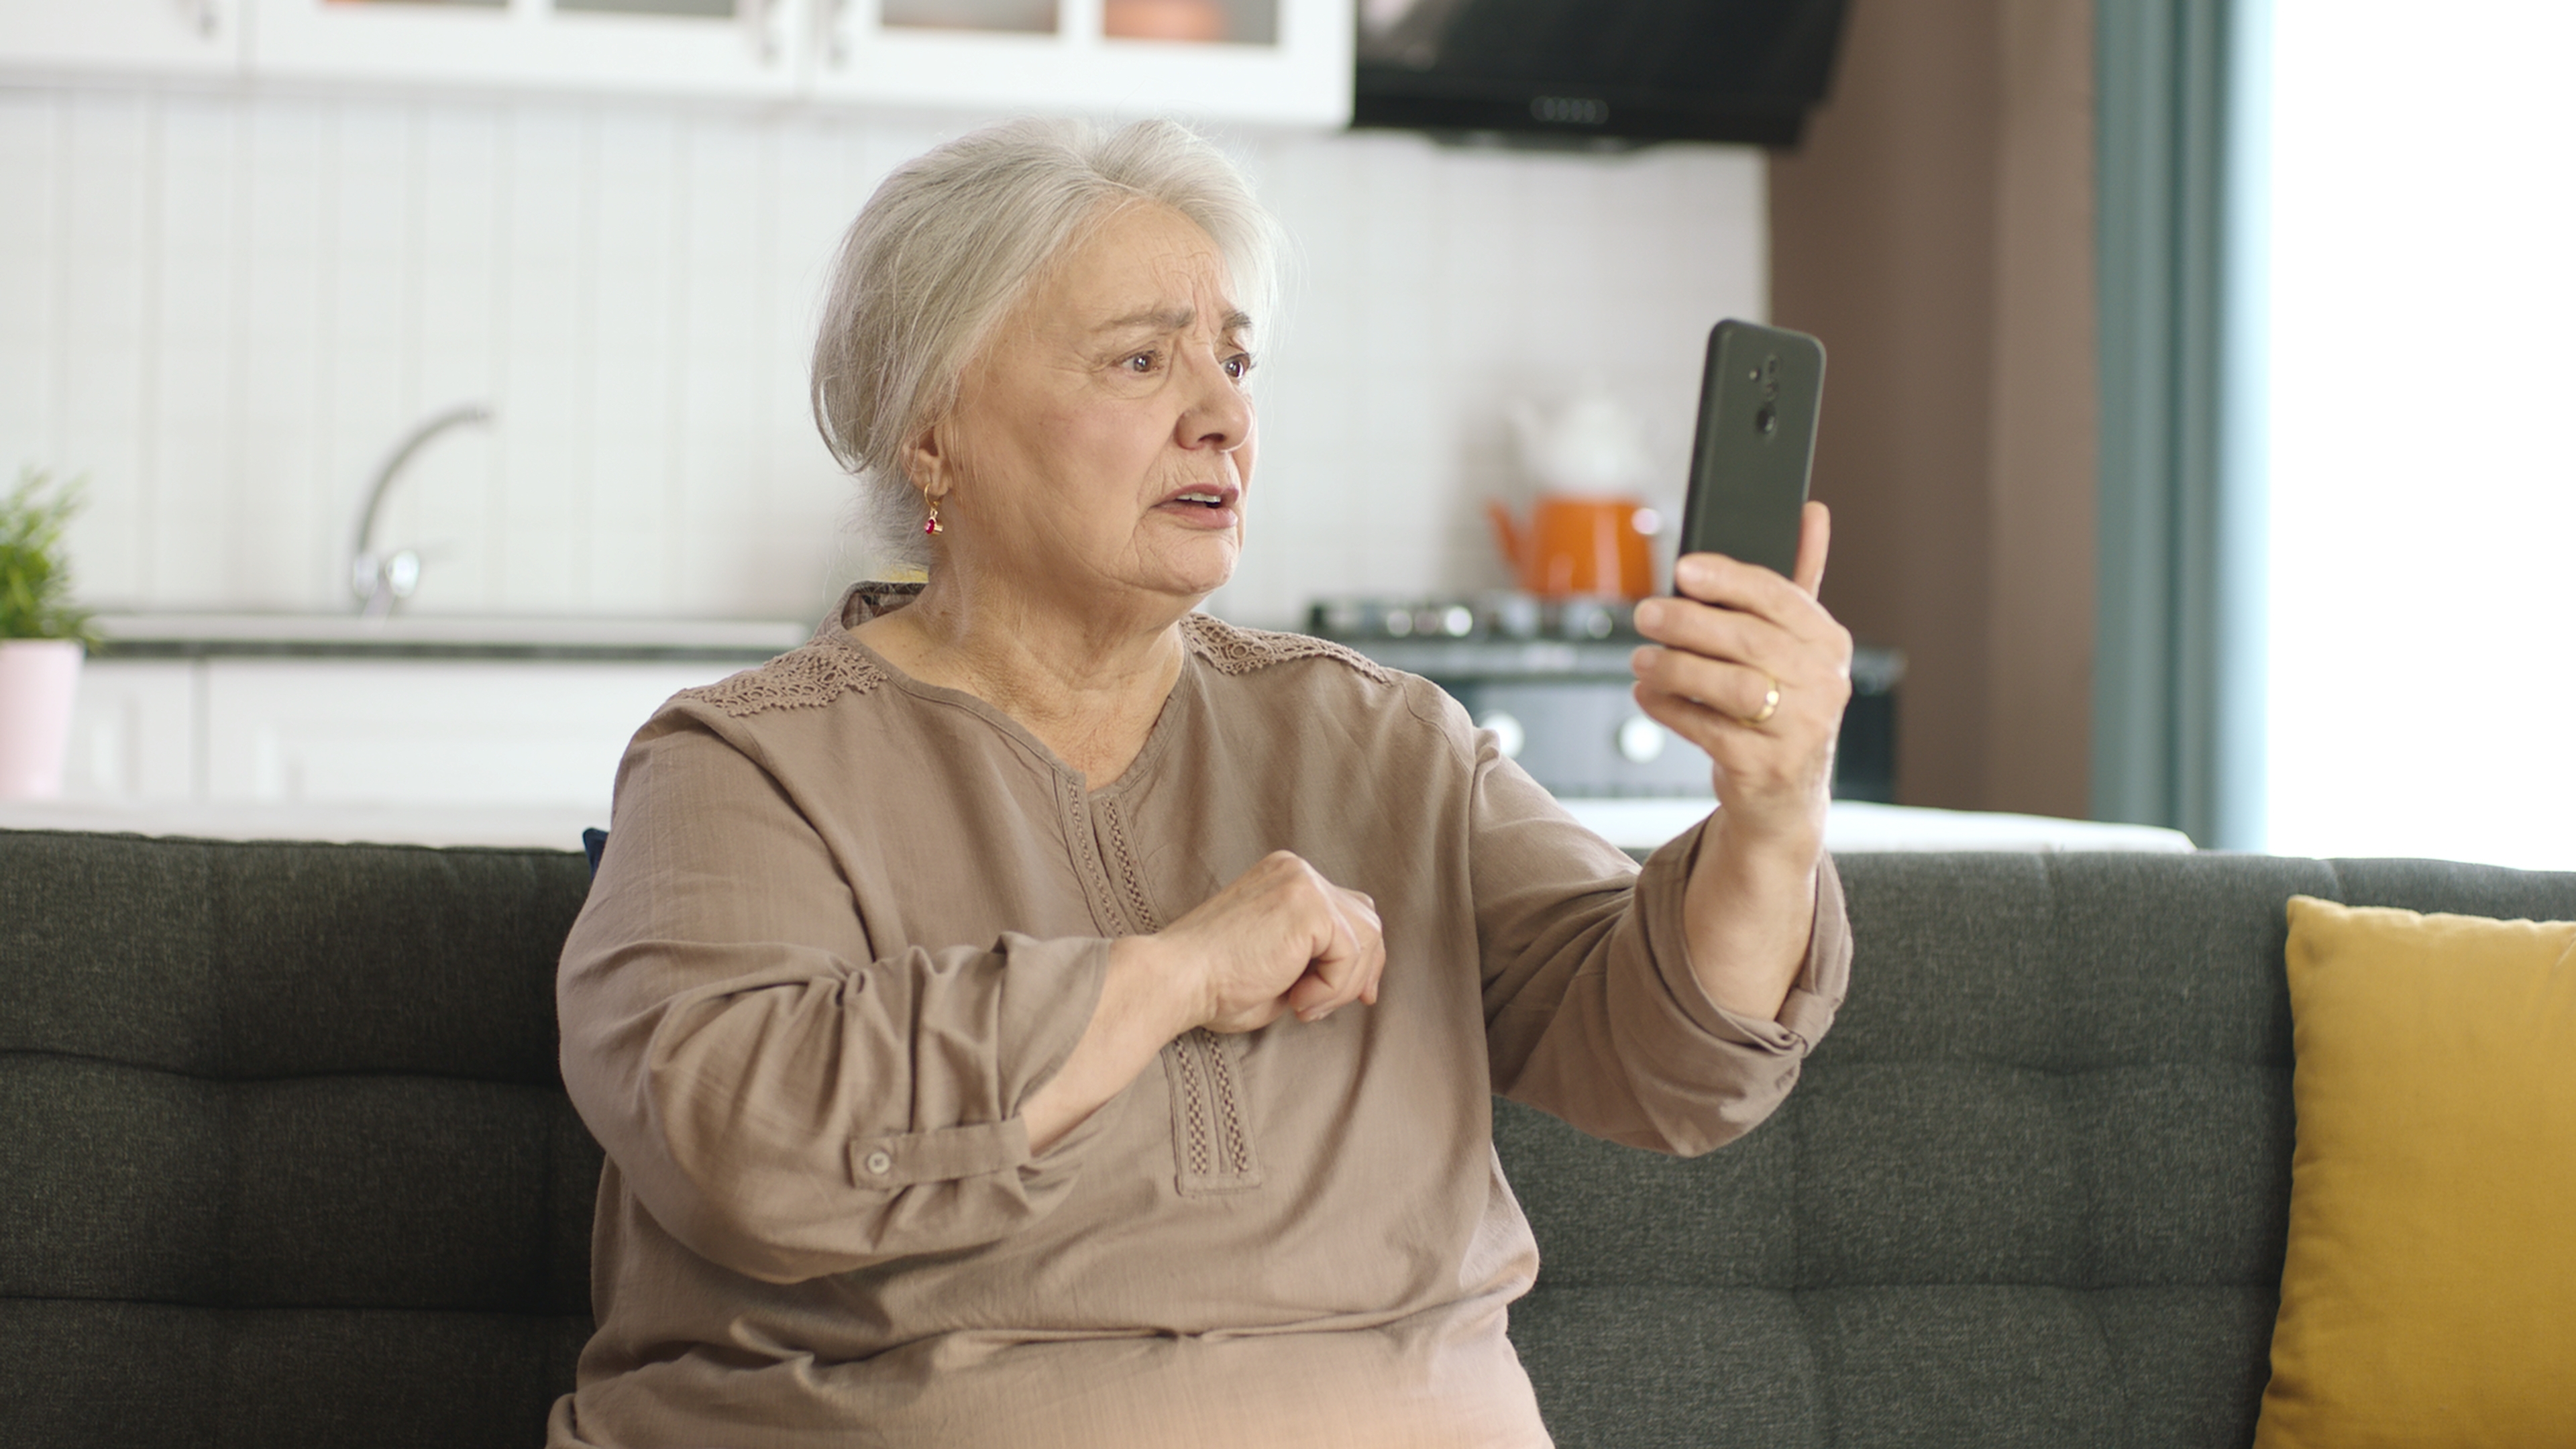 Angry older woman on looking at her phone | Source: